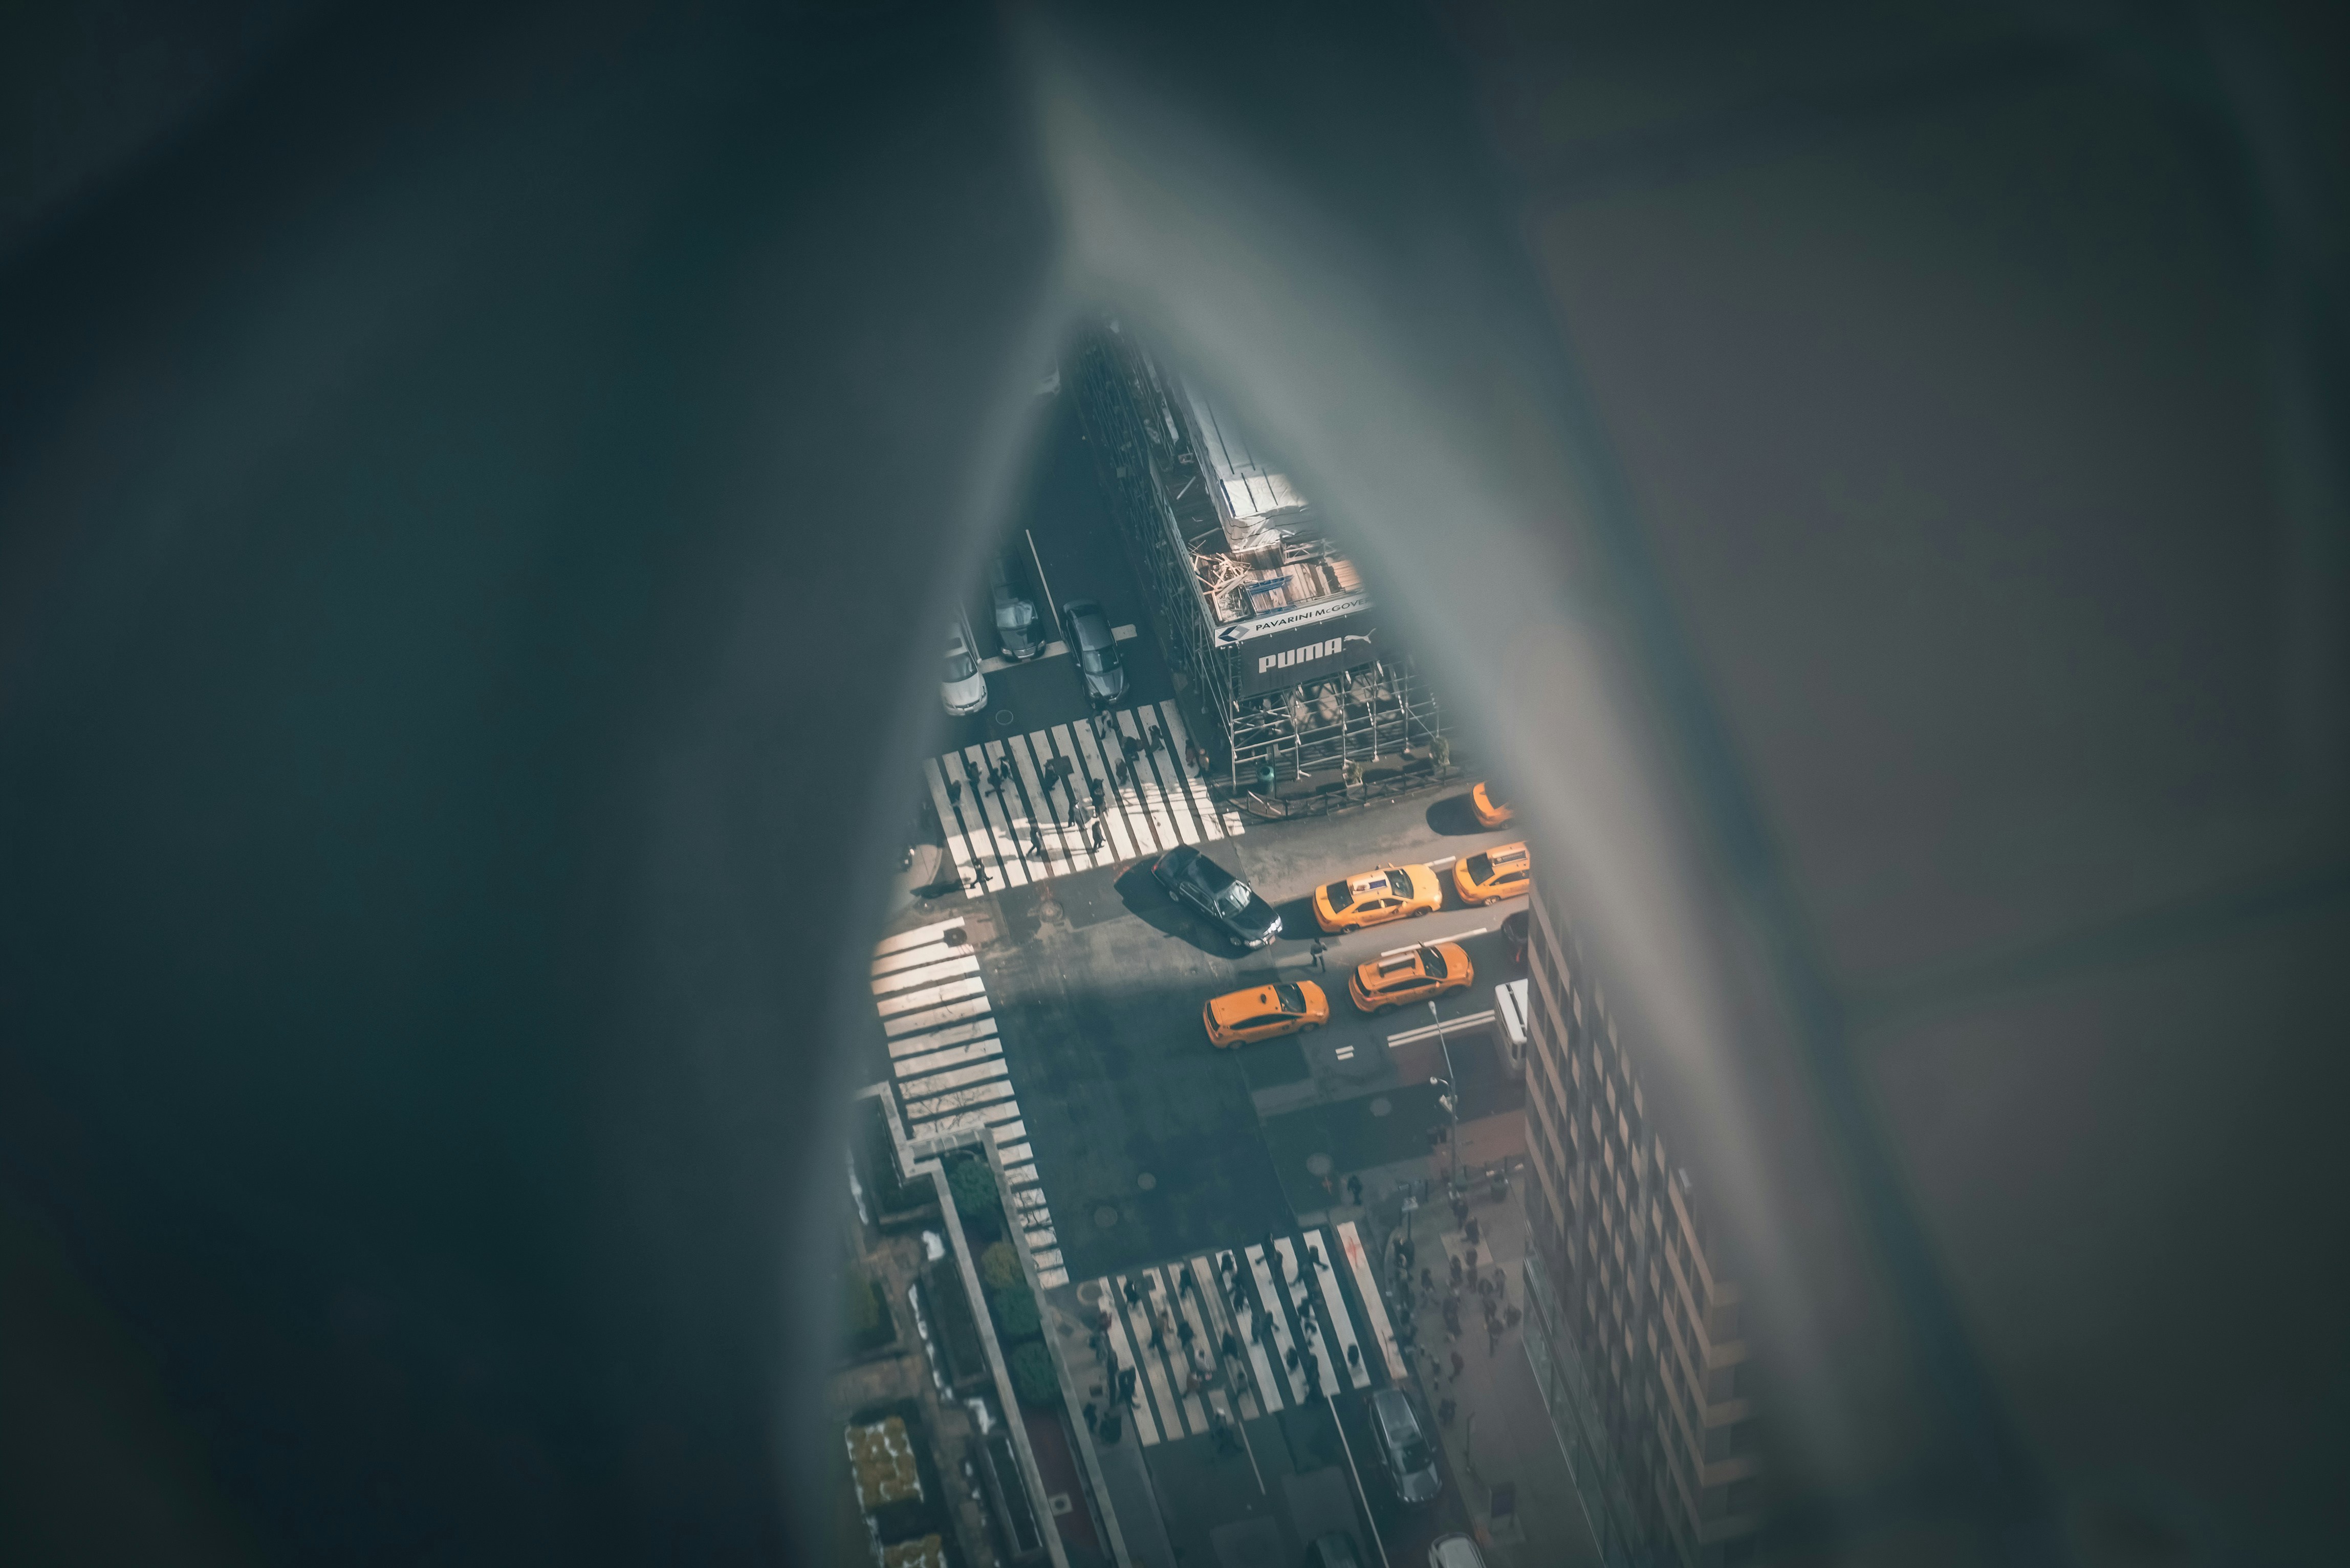 Choose from a curated selection of New York photos. Always free on Unsplash.